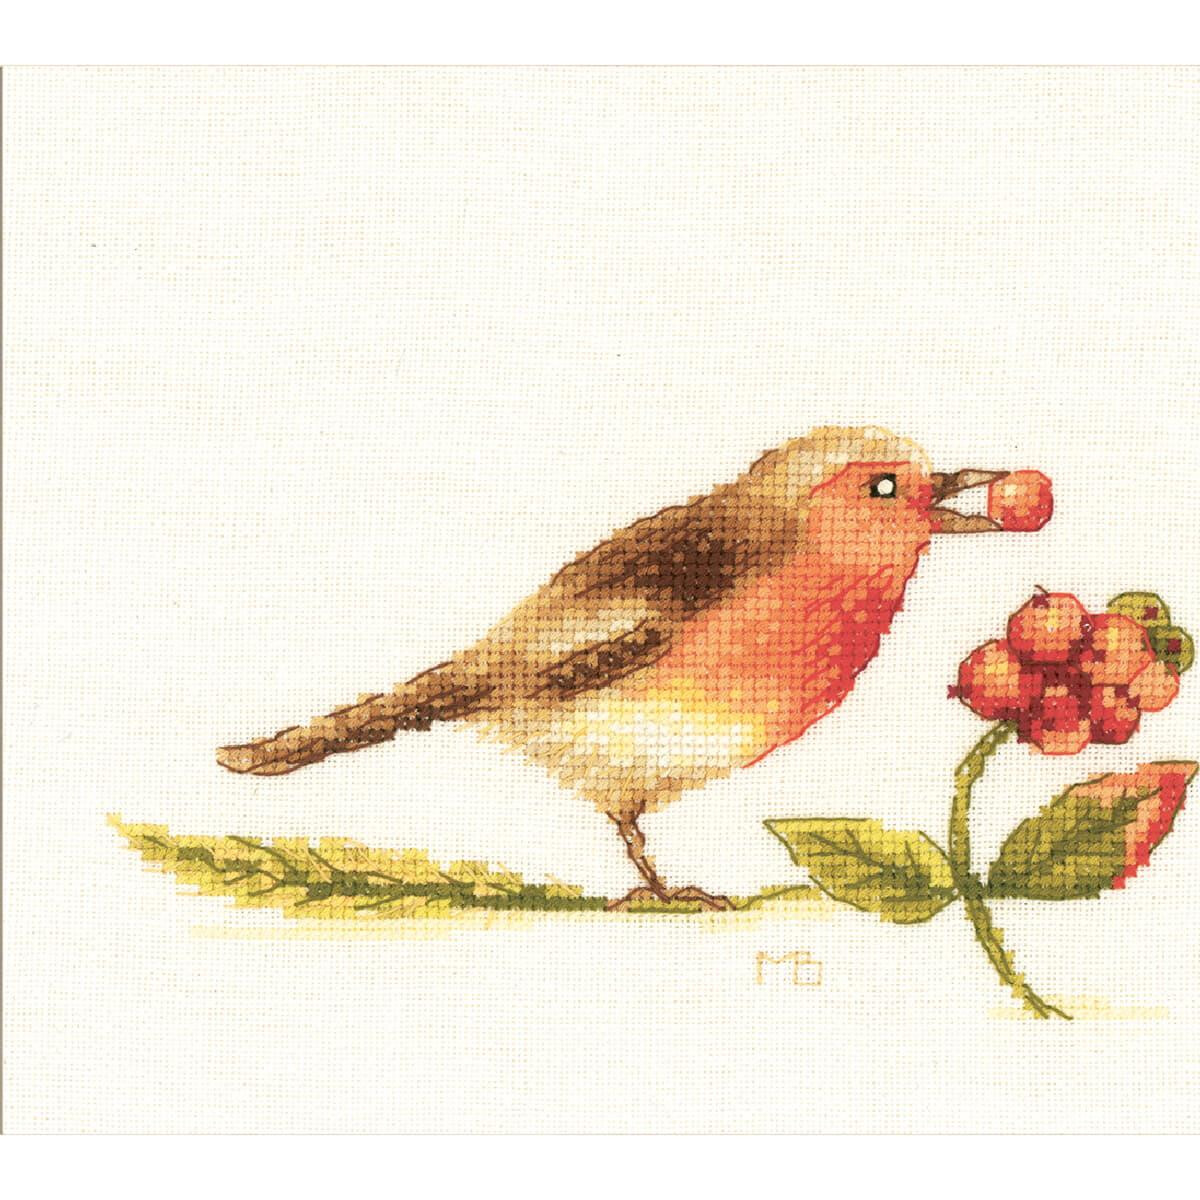 An embroidery pack from Lanarte shows a bird with brown...